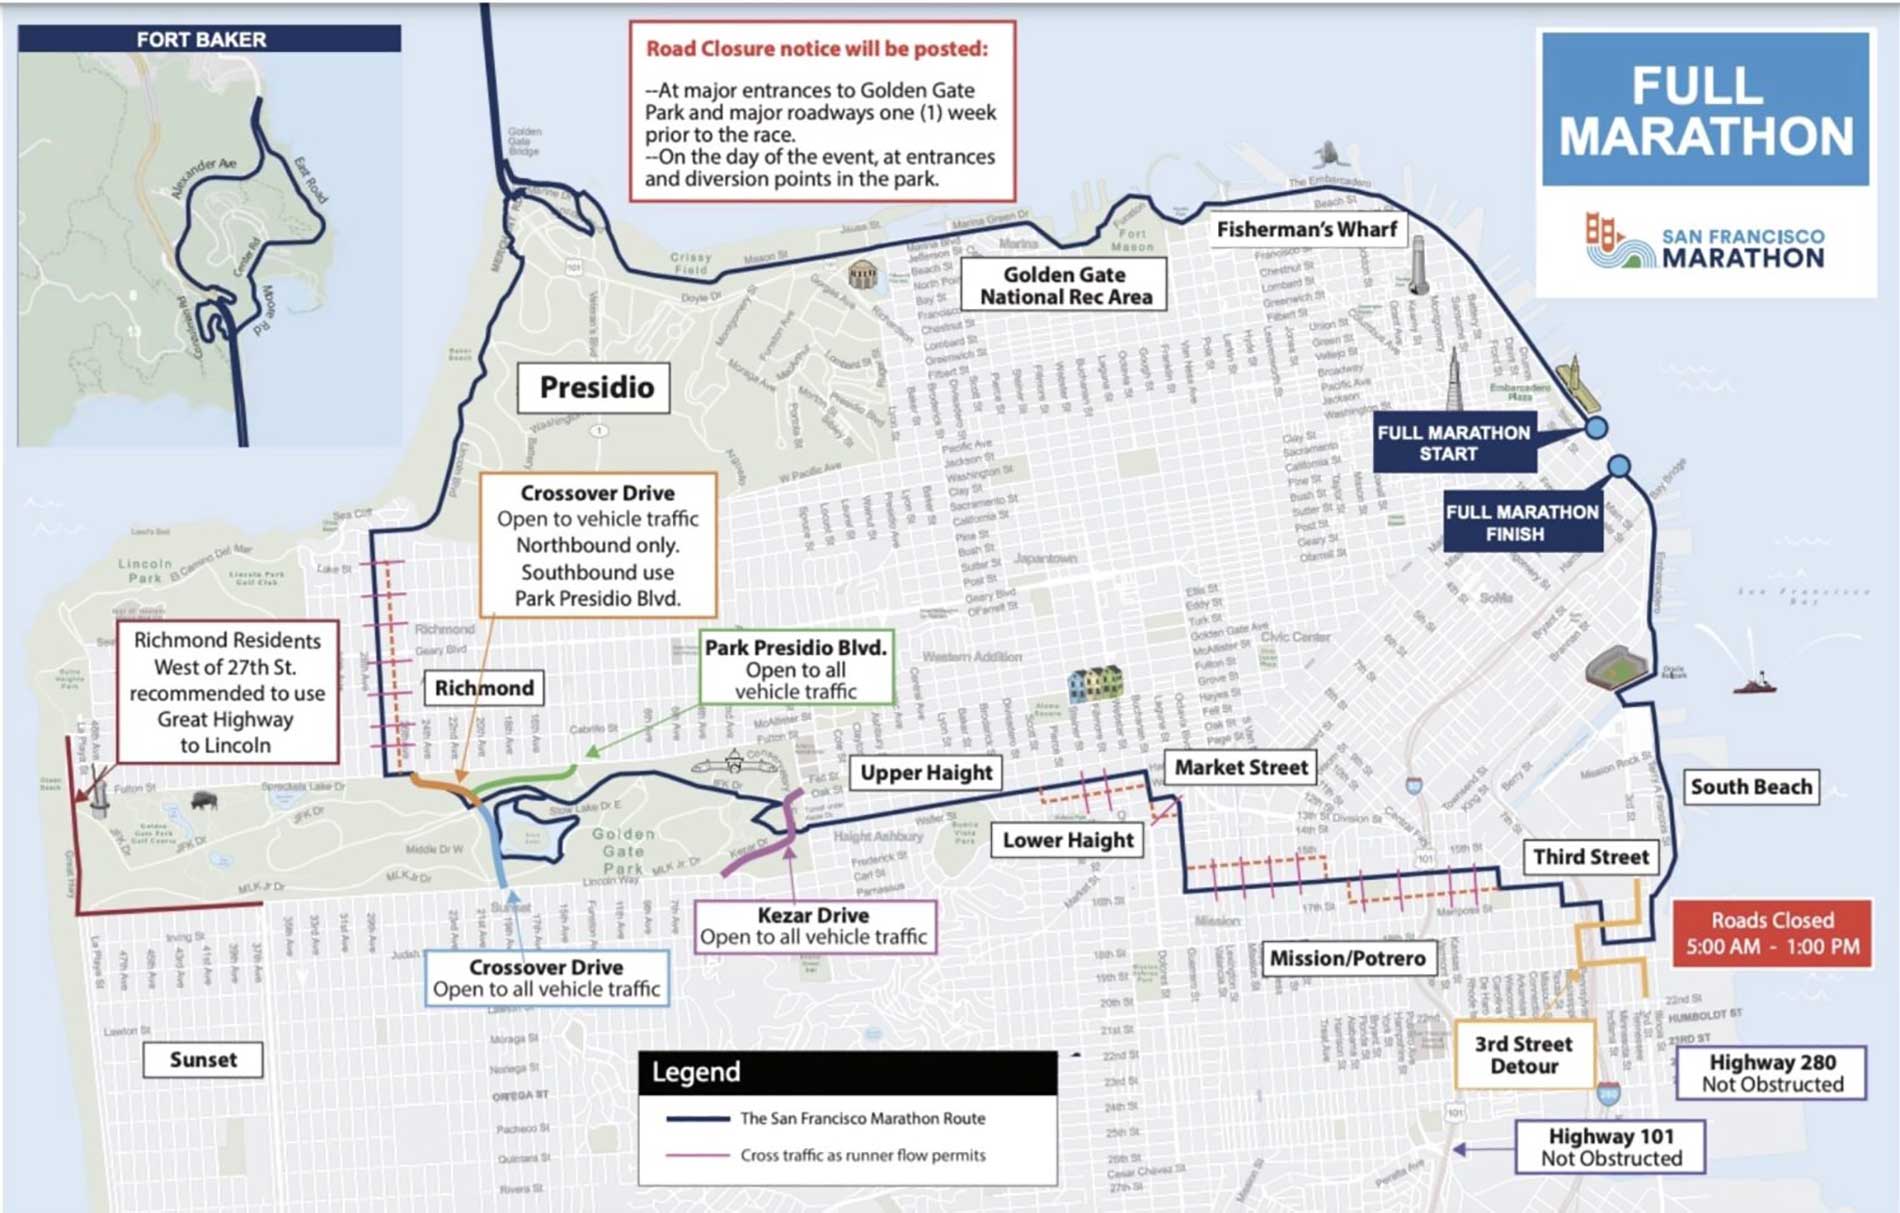 A map of the north portion of San Francisco detailing road closures 